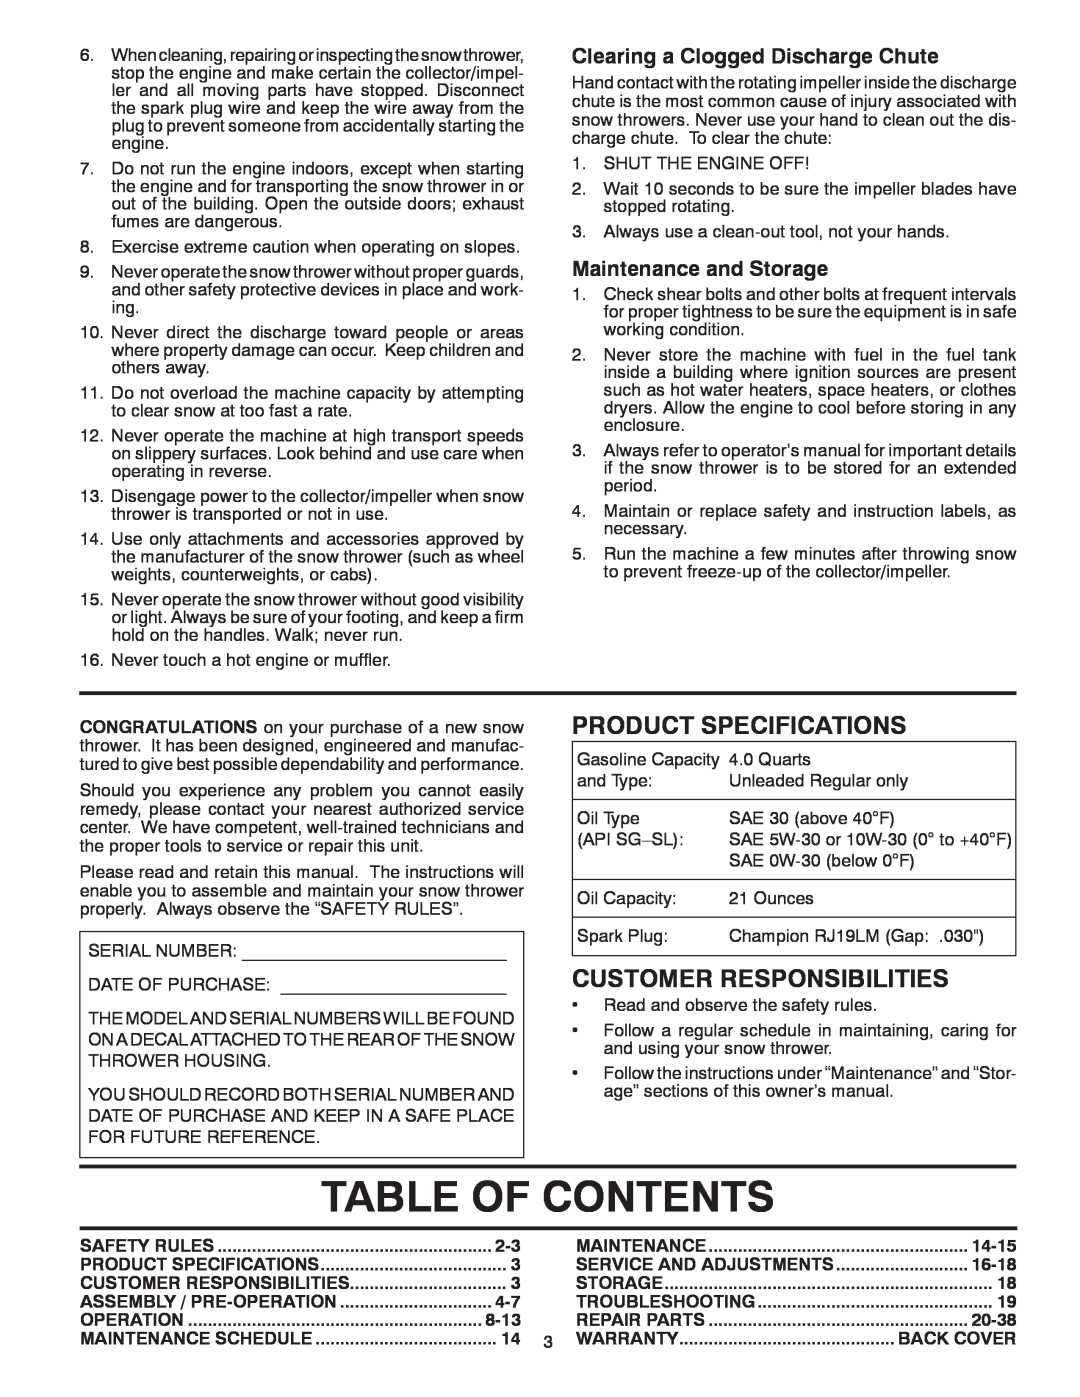 Poulan 422085 Table Of Contents, Product Specifications, Customer Responsibilities, Clearing a Clogged Discharge Chute 